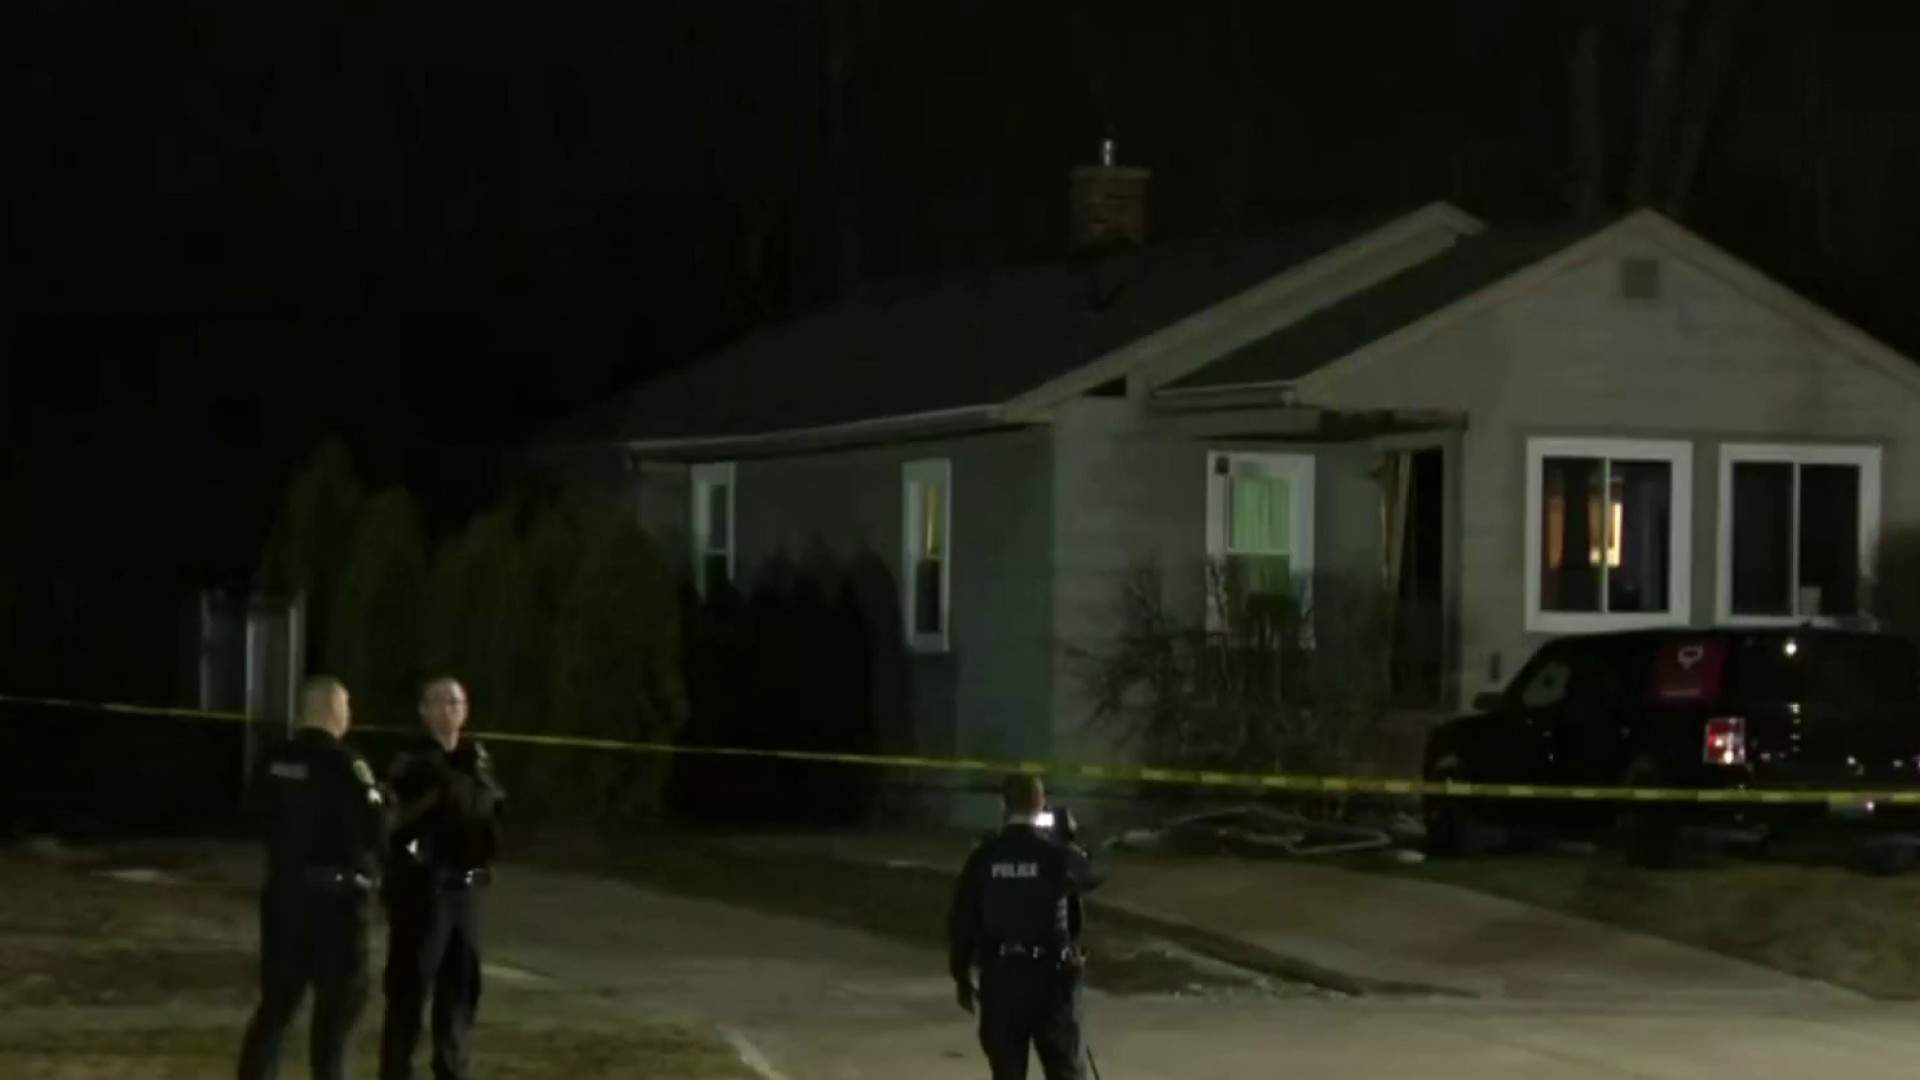 Clawson police: 15-year-old girl dies after being shot by stepfather at home